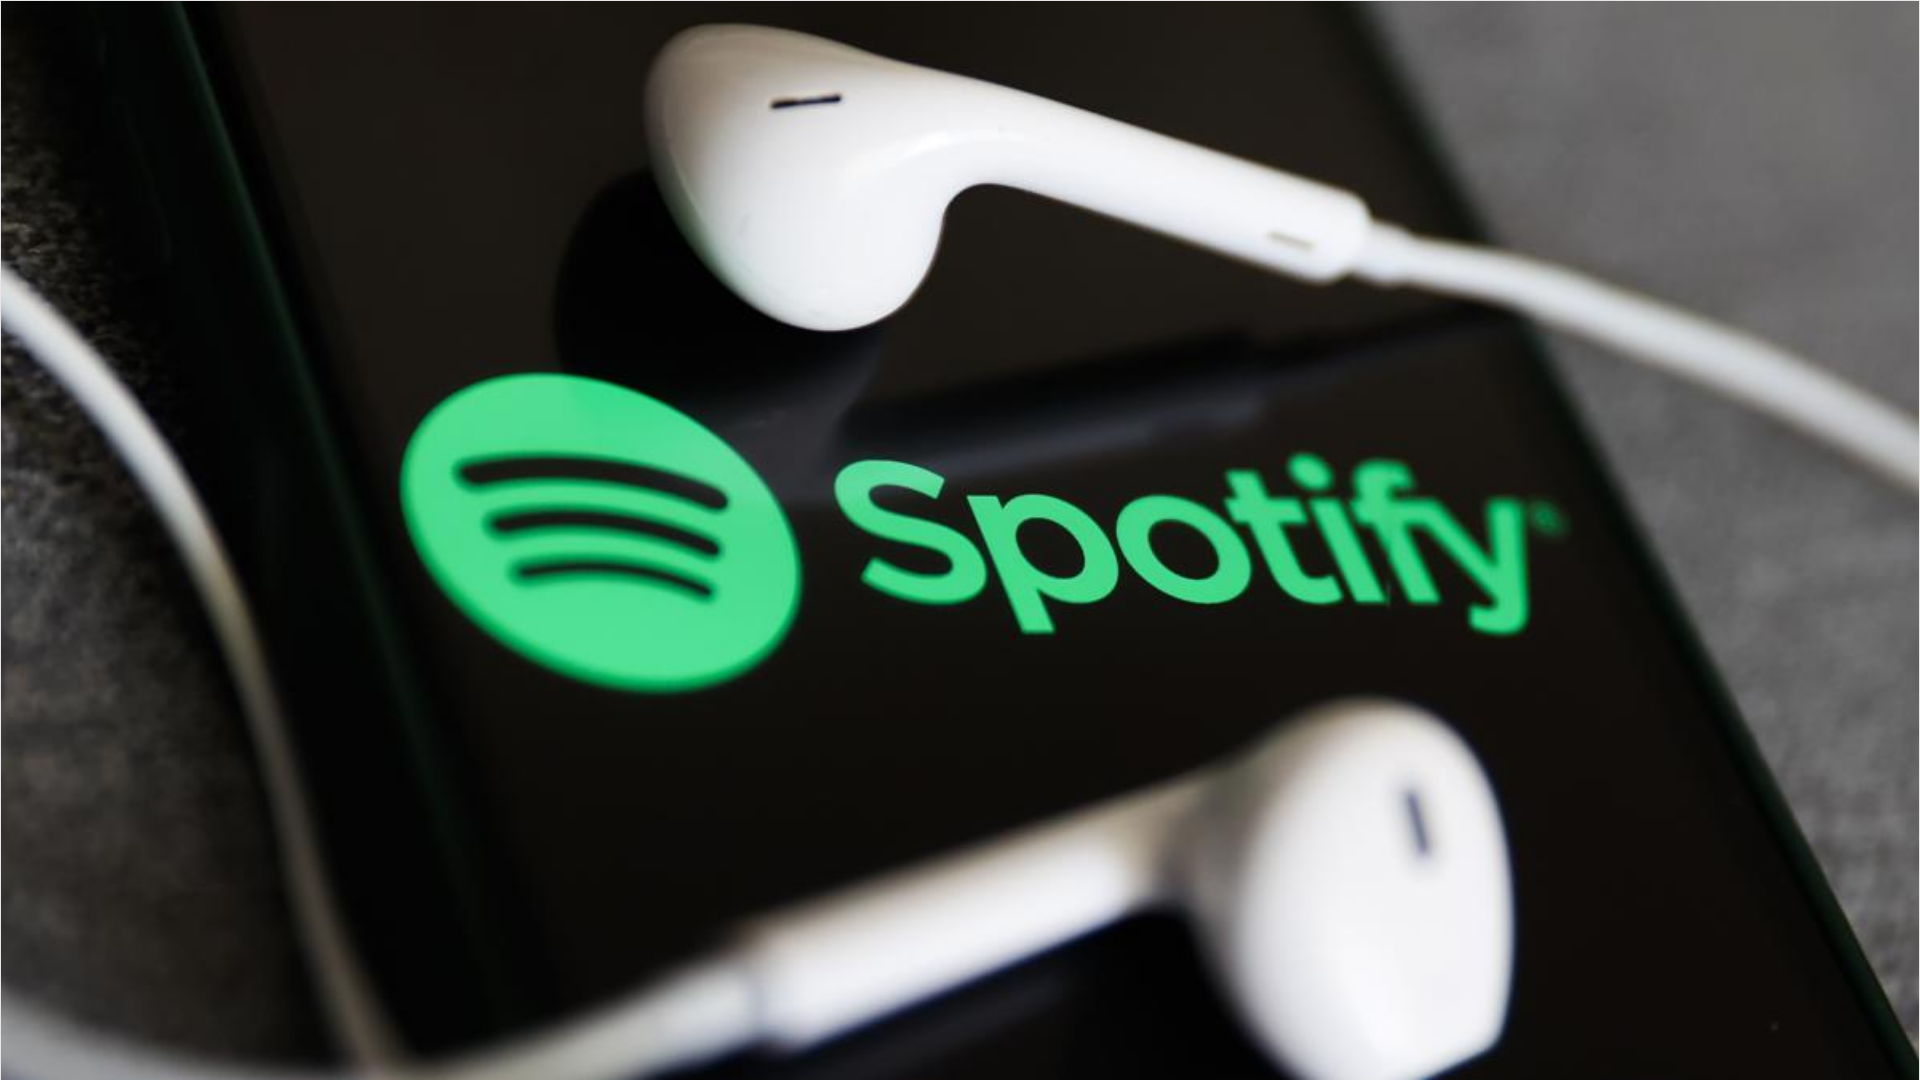 Spotify releases a new music streaming option called "Basic."